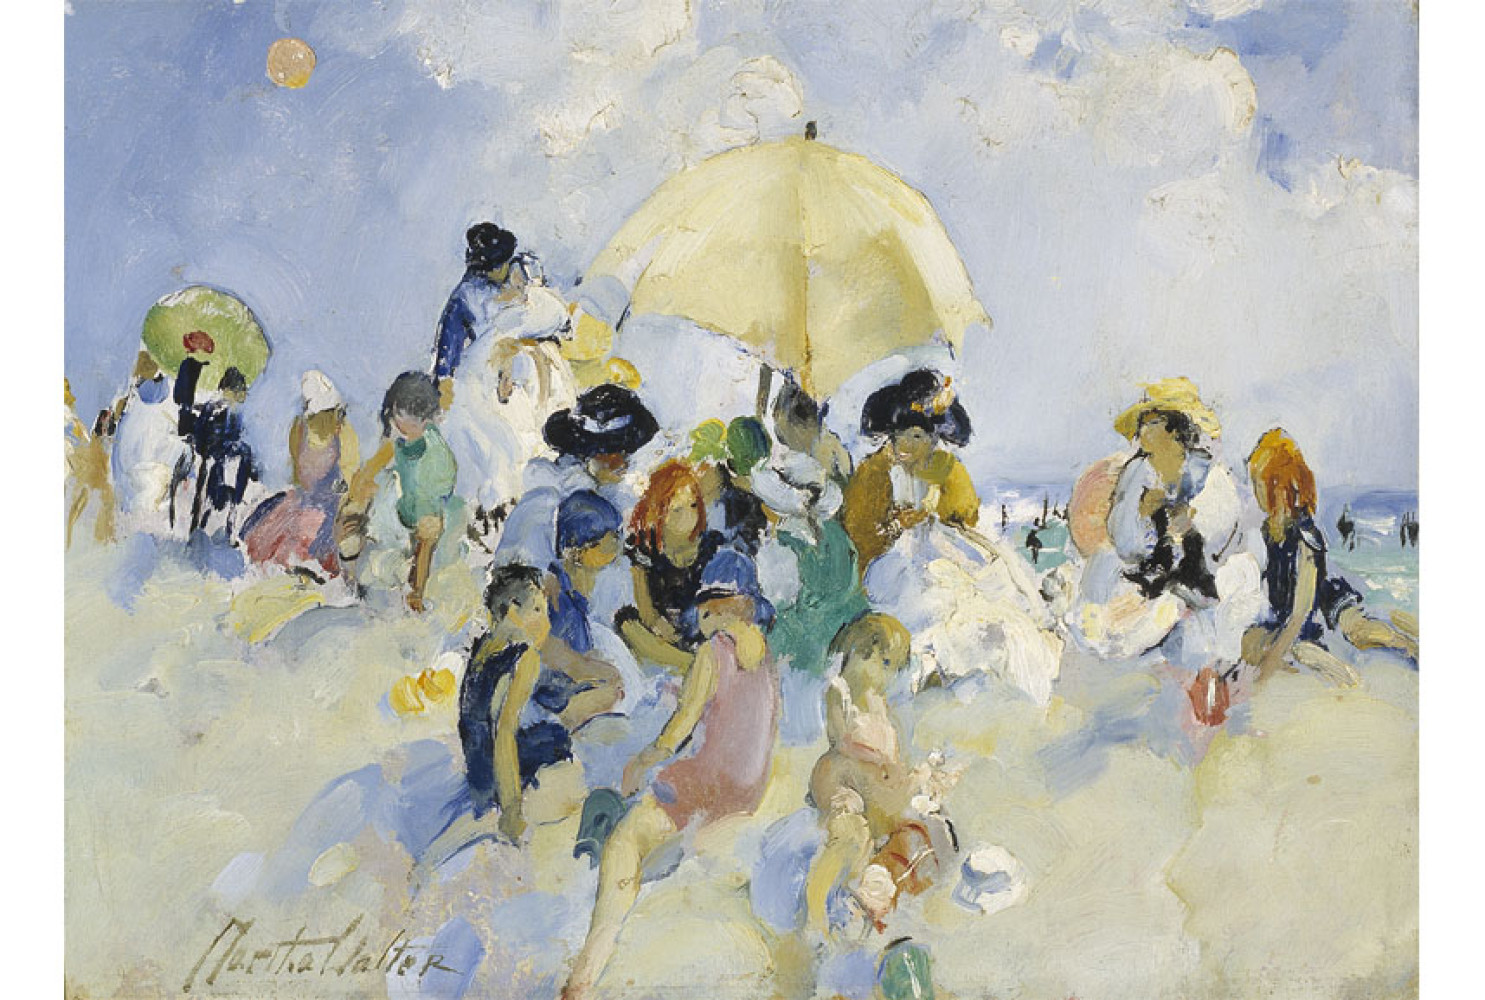 On the Beach, before 1930, By Martha Walter (American, 1875—1976); Oil on academy board; 20 1/8 x 25 1/4 inches; Gift of Anna Heyward Taylor; 1955.008.0002
